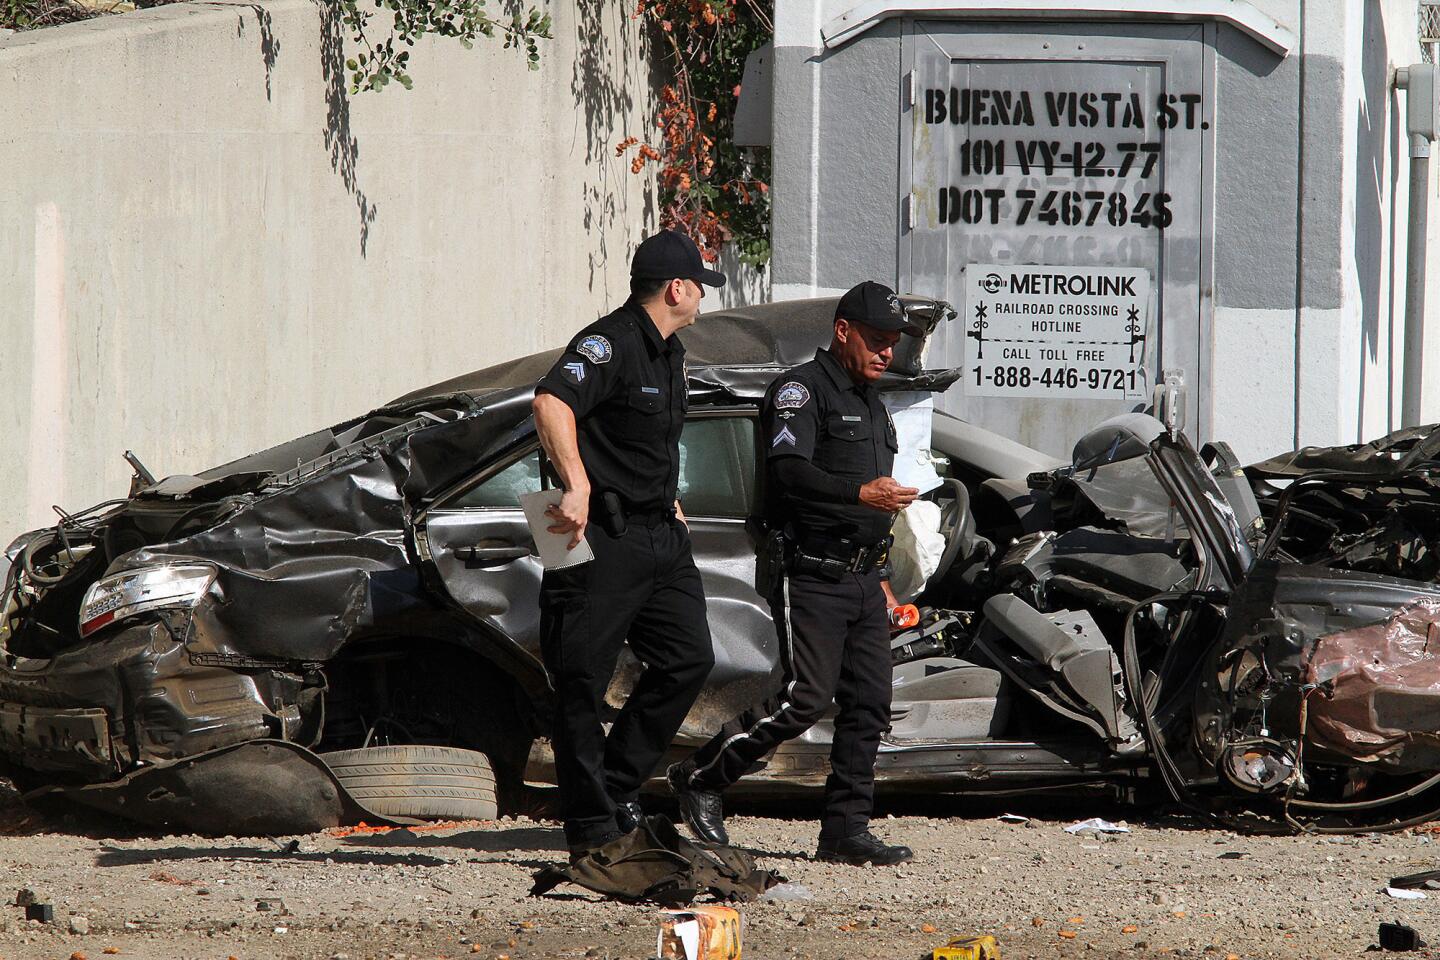 Two Burbank police officers walk passed a mangled vehicle resting off from the intersection of San Fernando and Buena Vista in Burbank after being clipped by a MetroLink train on Monday, September 2, 2014.